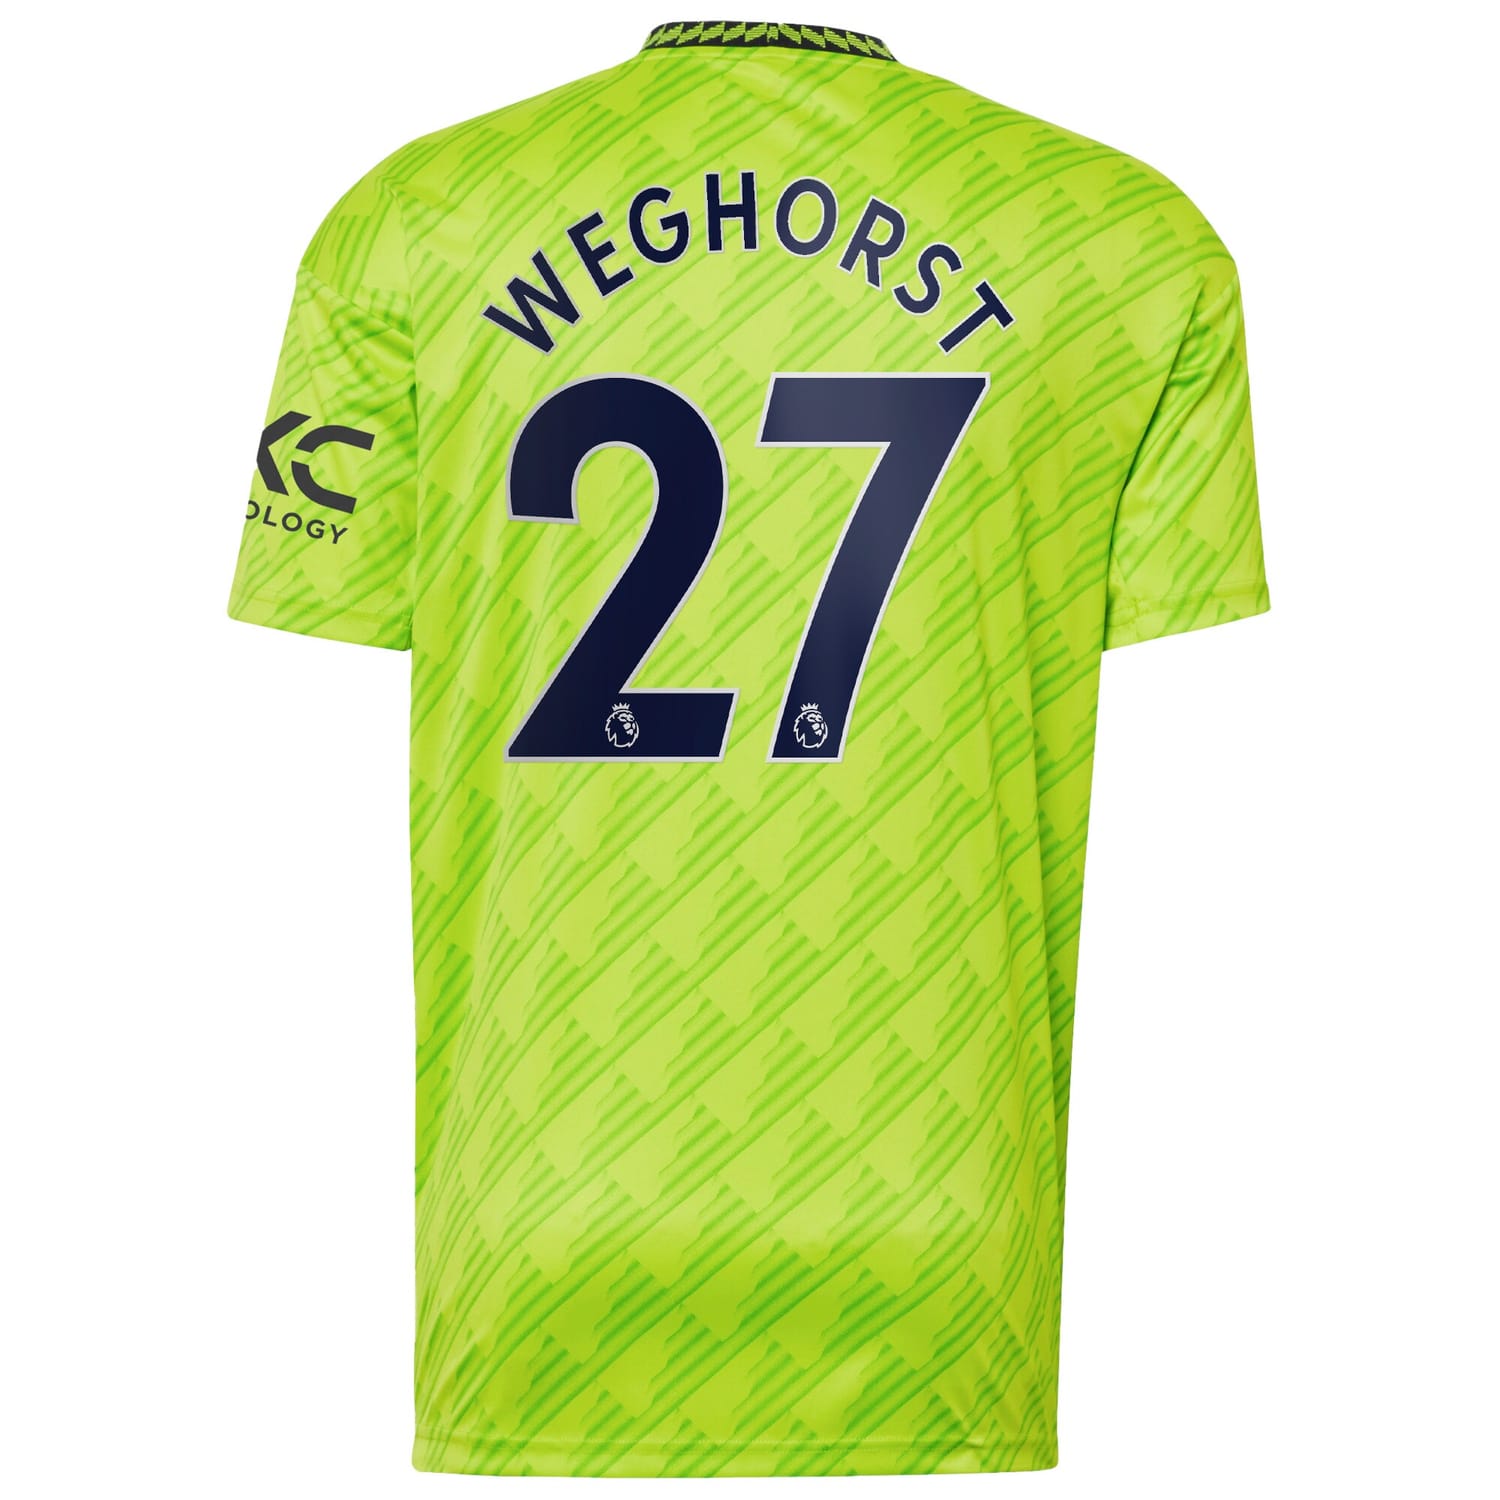 Premier League Manchester United Third Jersey Shirt 2022-23 player Wout Weghorst 27 printing for Men